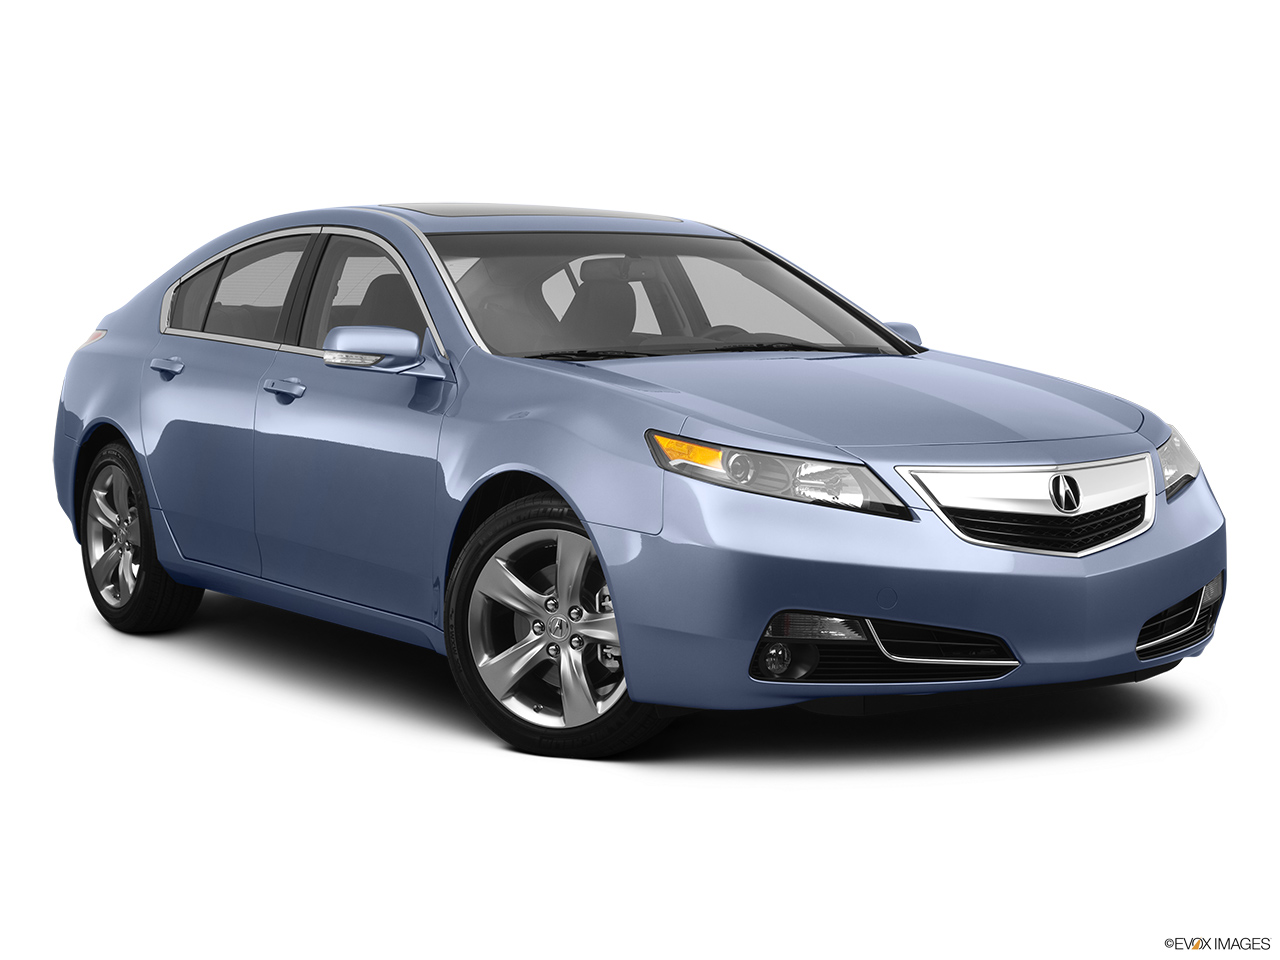 2012 Acura TL TL Front passenger 3/4 w/ wheels turned. 